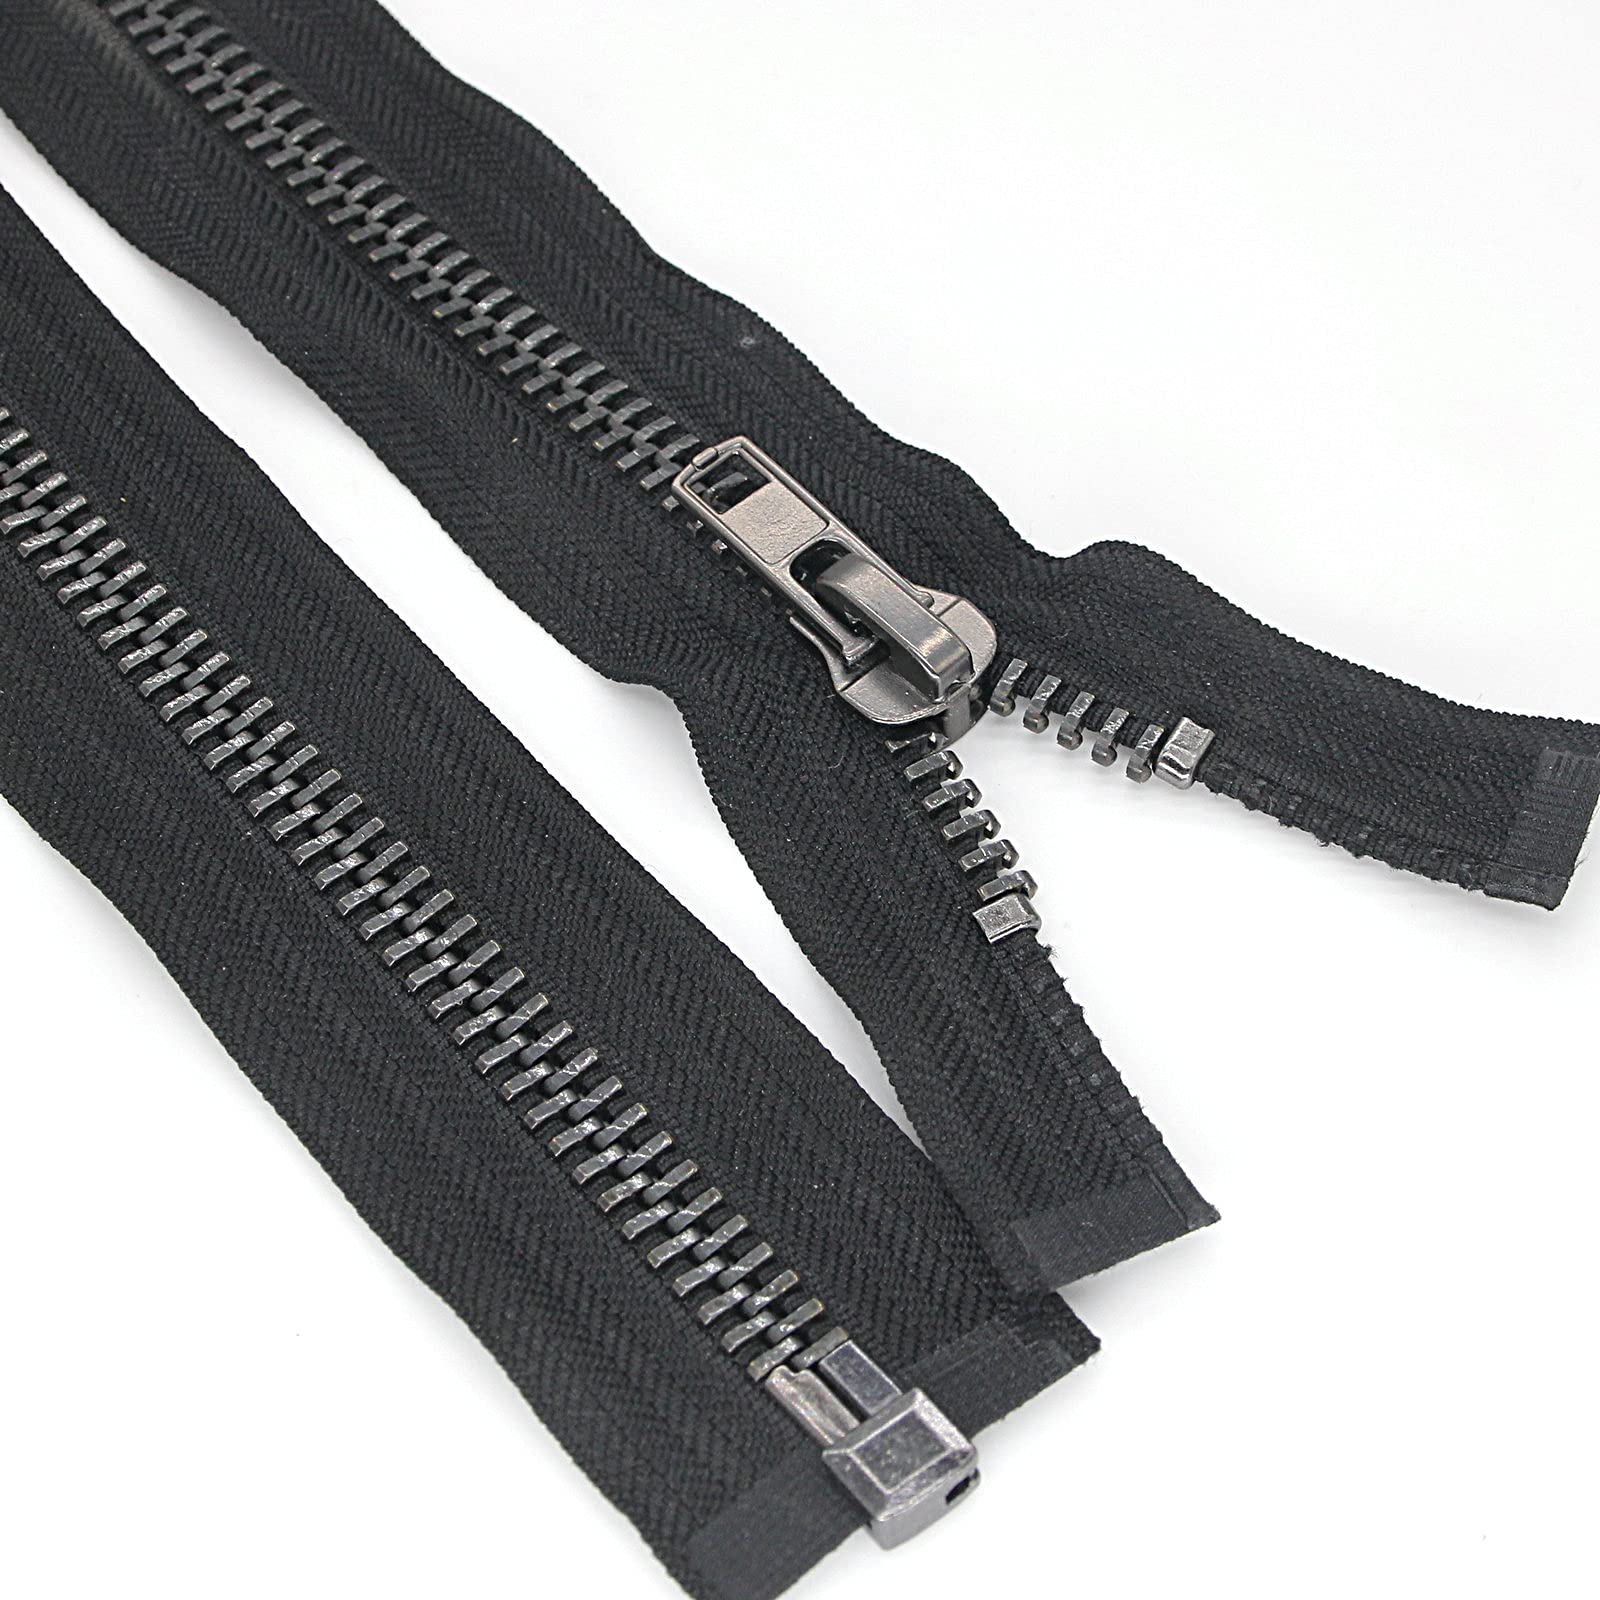 10 22 Inch Metal Jacket Zippers Black Nickel Separating Zipper Heavy Duty  Zippers Replacement Zipper for Sewing Crafts Jackets Coats Vest Bags  Luggage SHUNLI 22